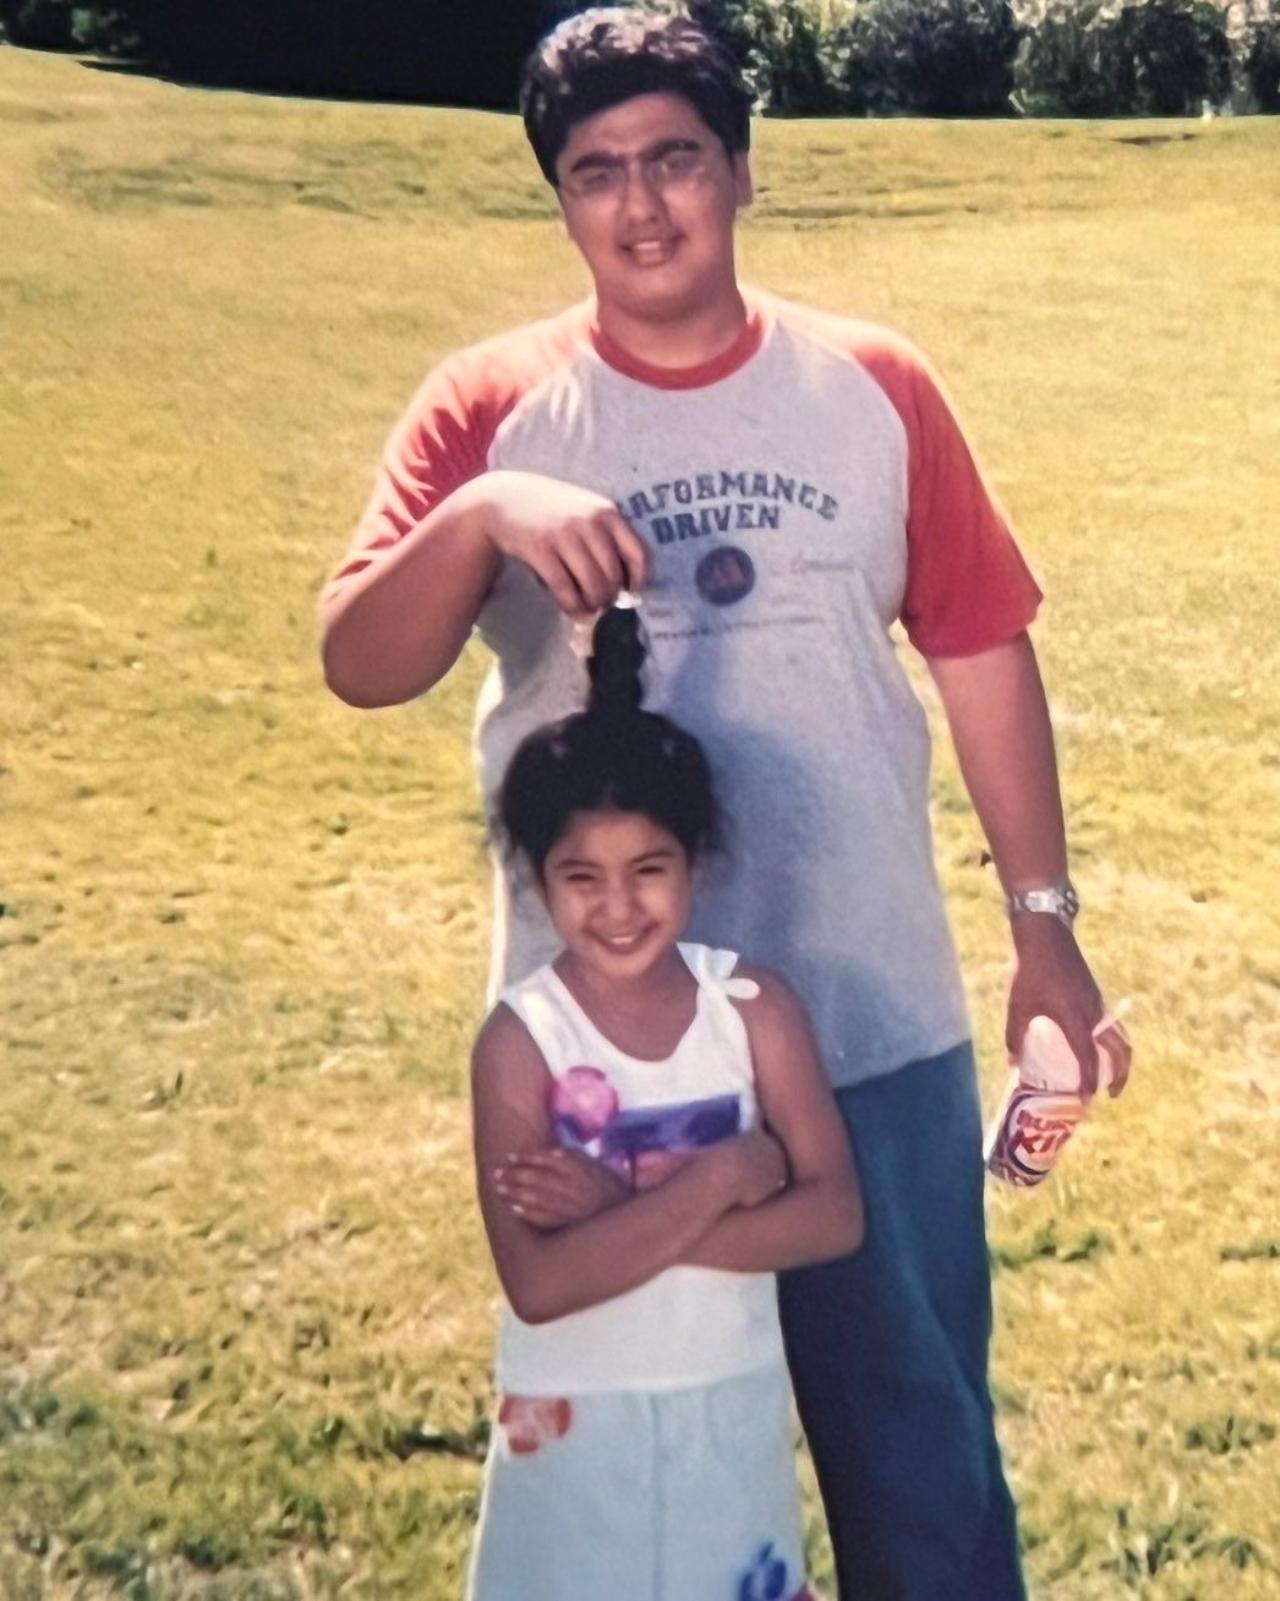 Arjun Kapoor being the big brother to Janhvi Kapoor in this childhood picture